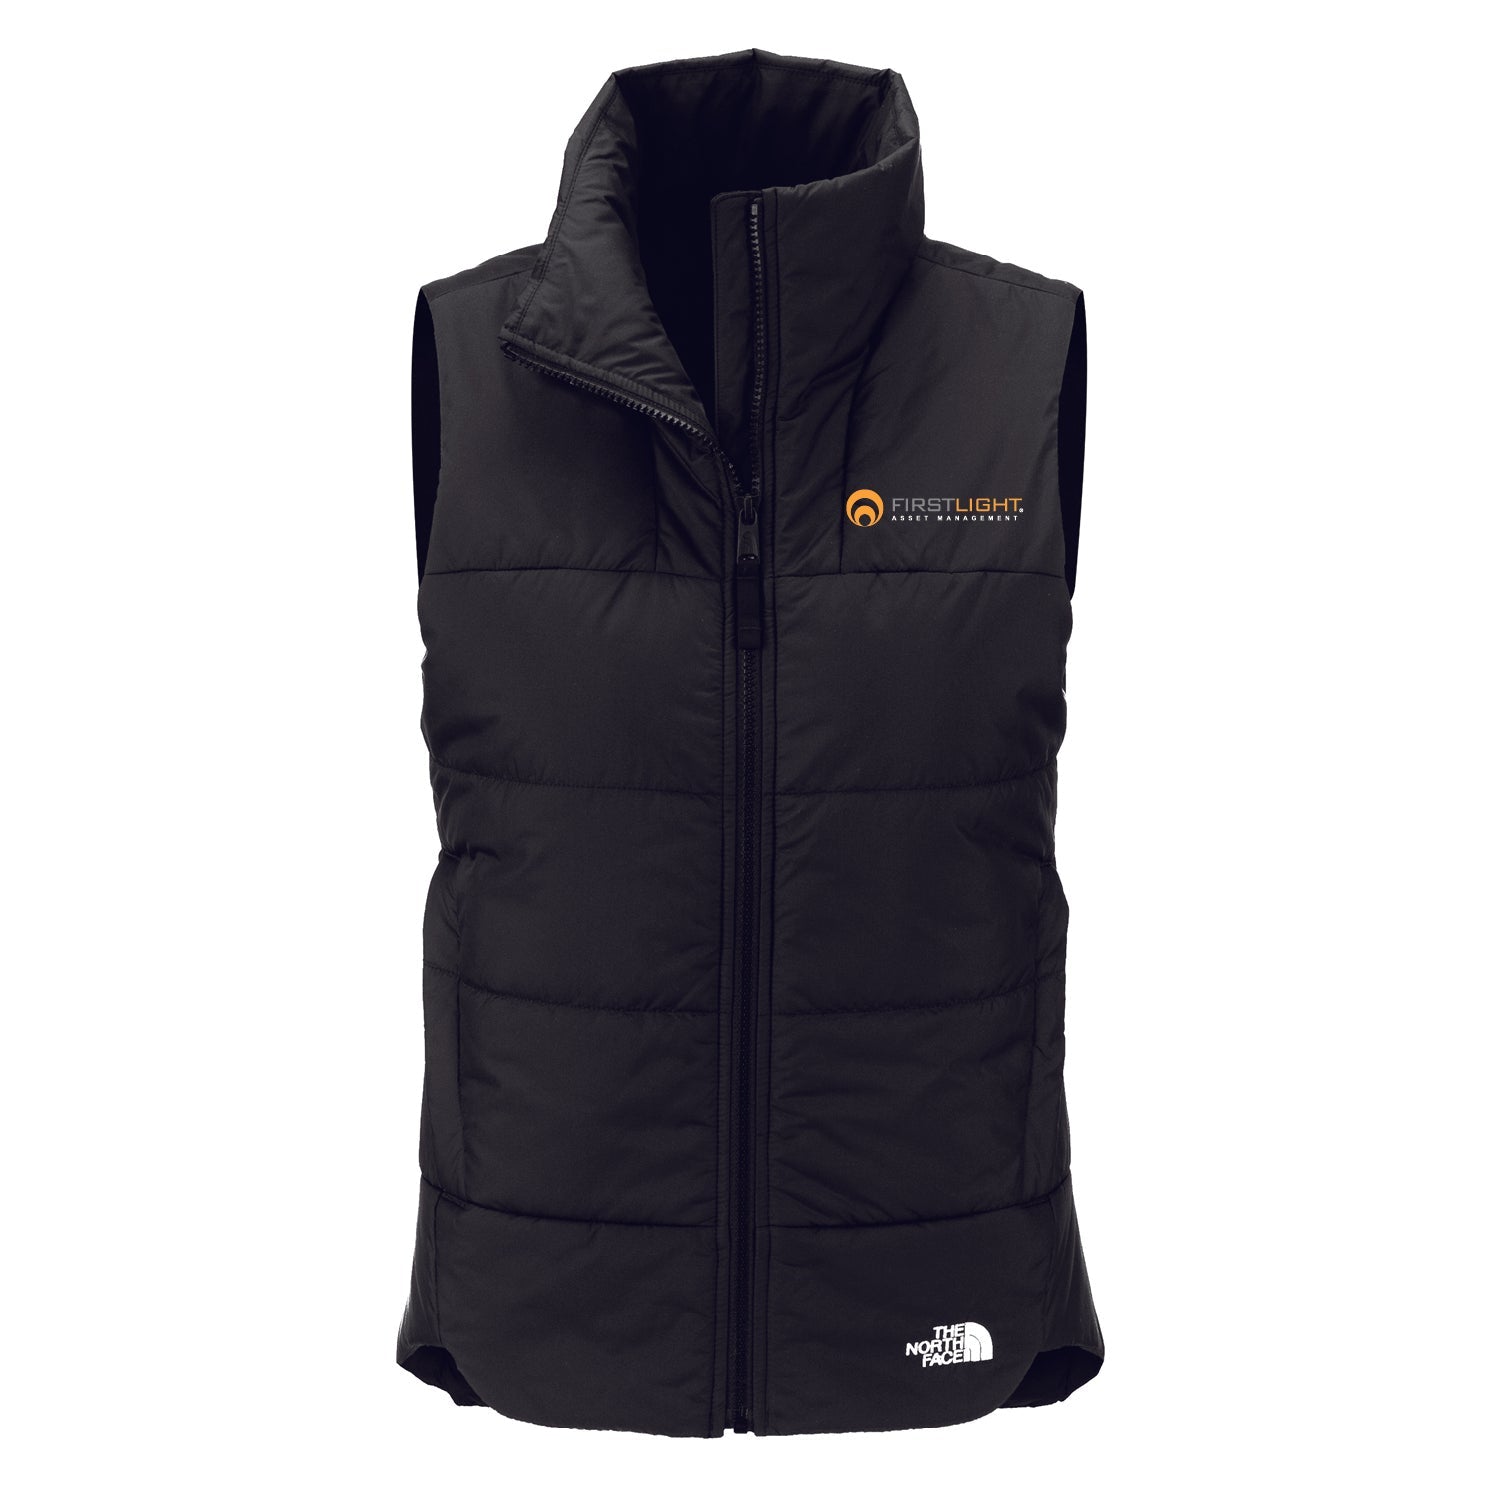 First Light The North Face Ladies Everyday Insulated Vest - DSP On Demand